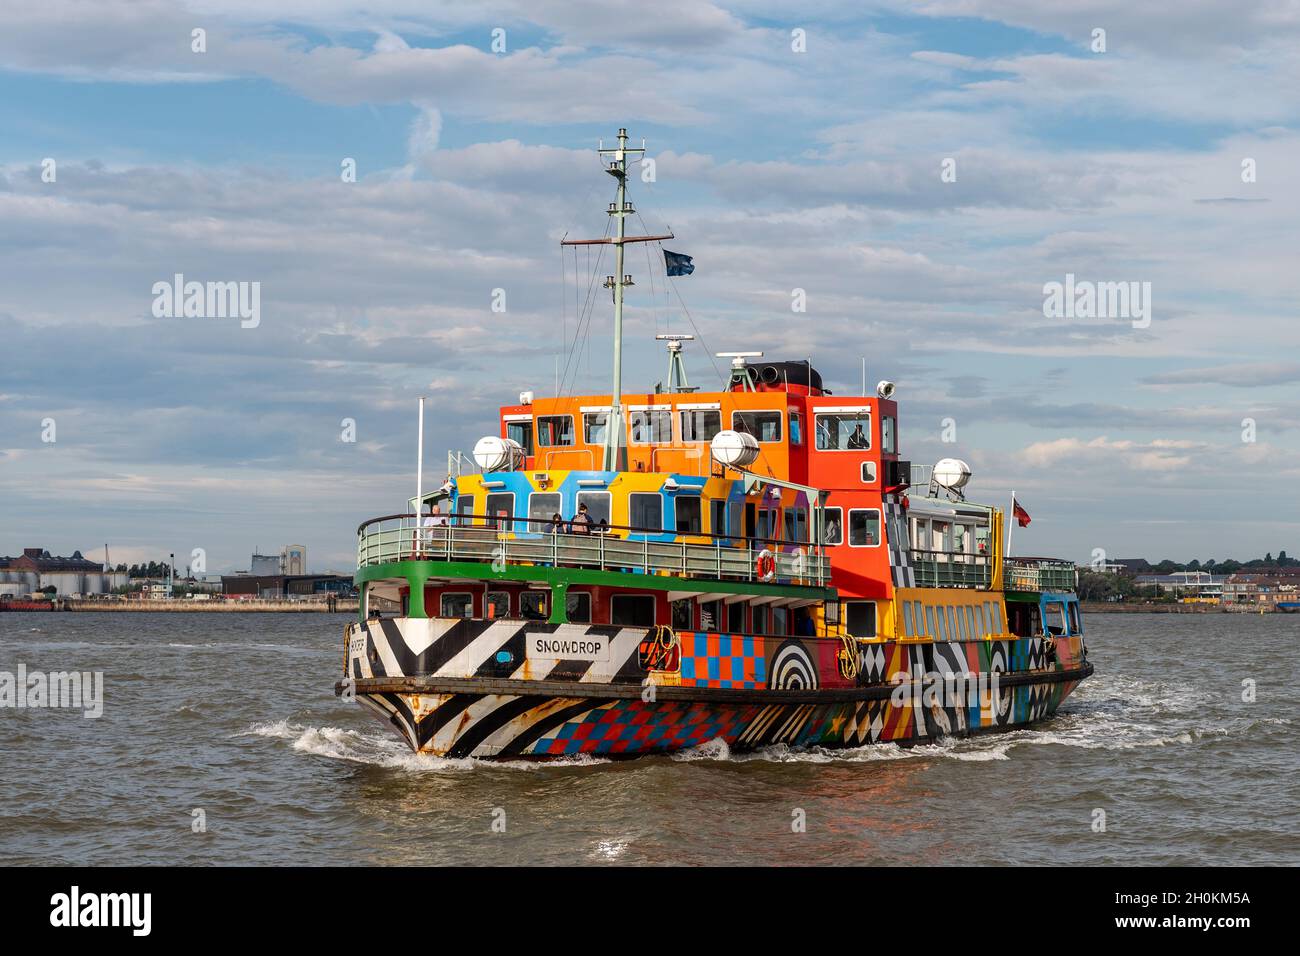 Mersey Ferry 'Snowdrop' approaches the dock at Pier Head in Liverpool, Merseyside, UK. Stock Photo